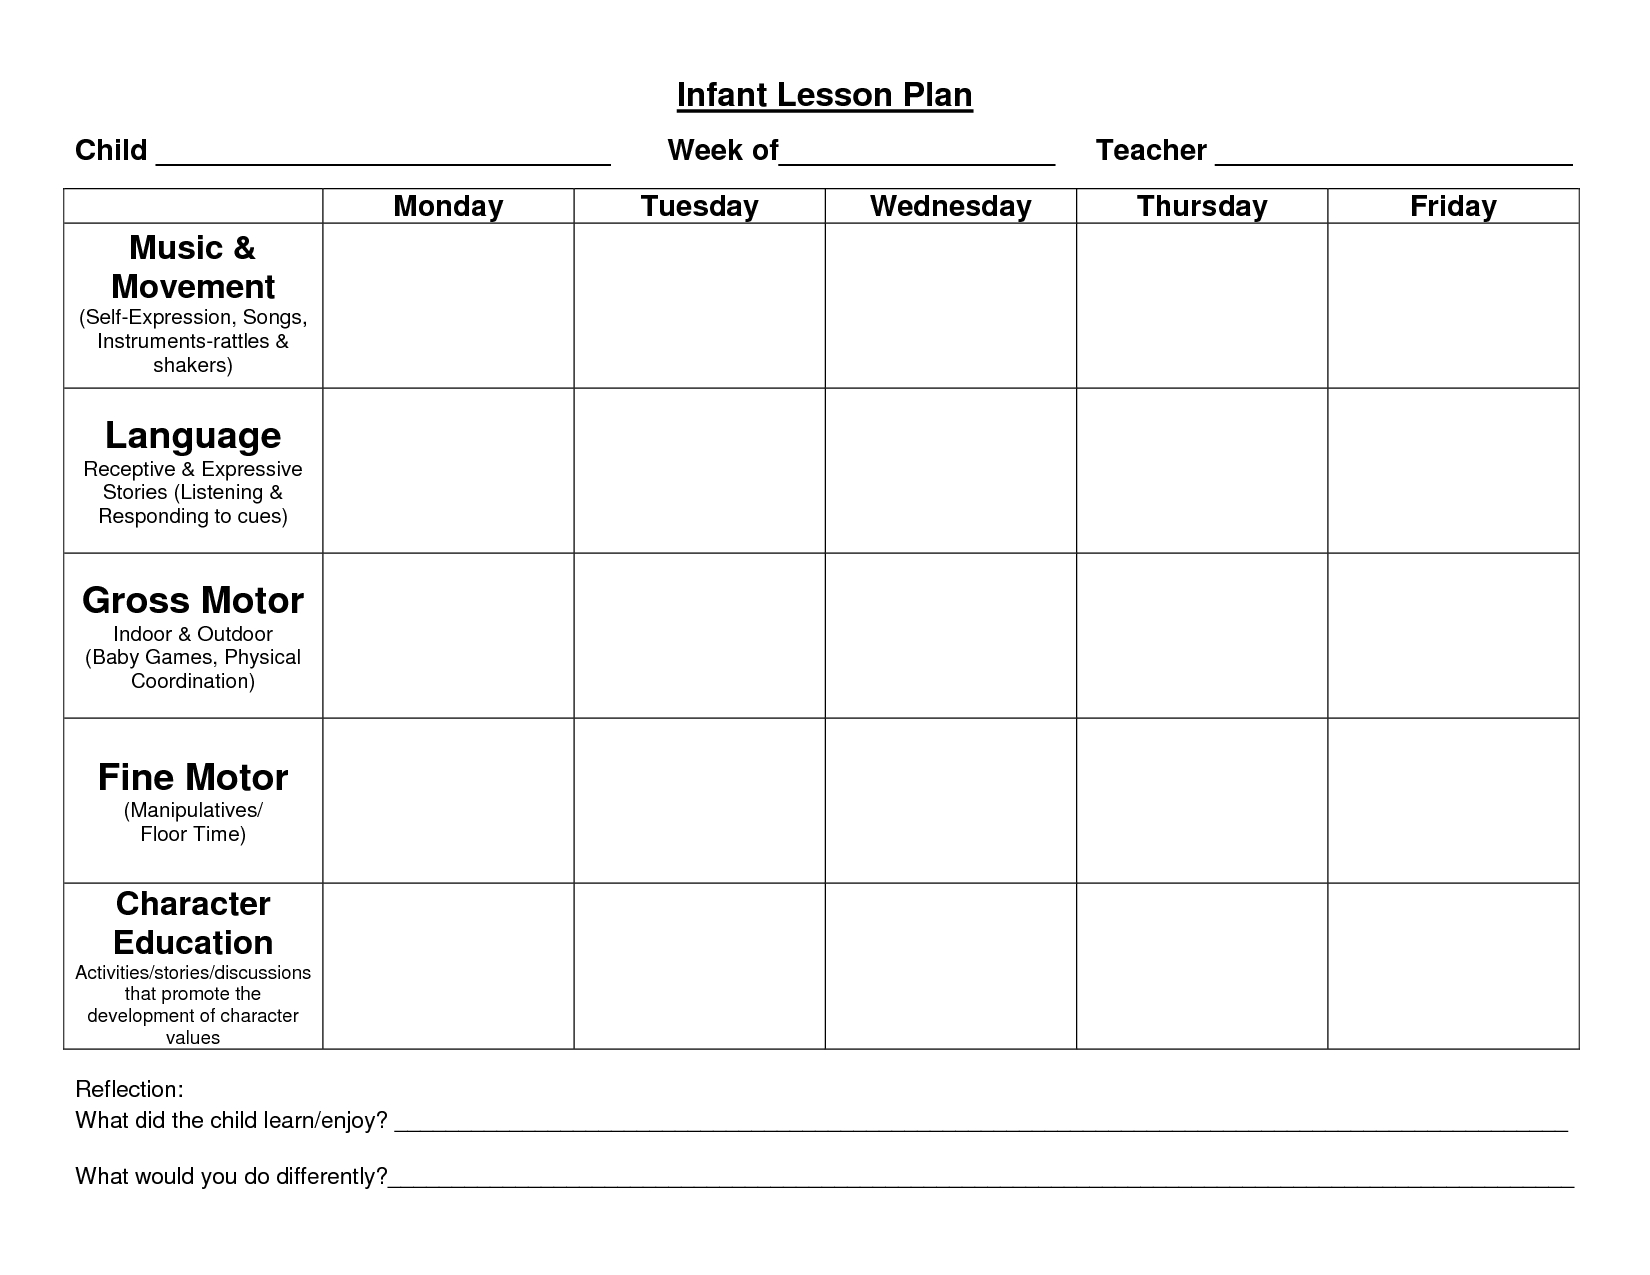 Infant Blank Lesson Plan Sheets | Provider Sample Lesson intended for Monthly Lesson Plan Template 2019